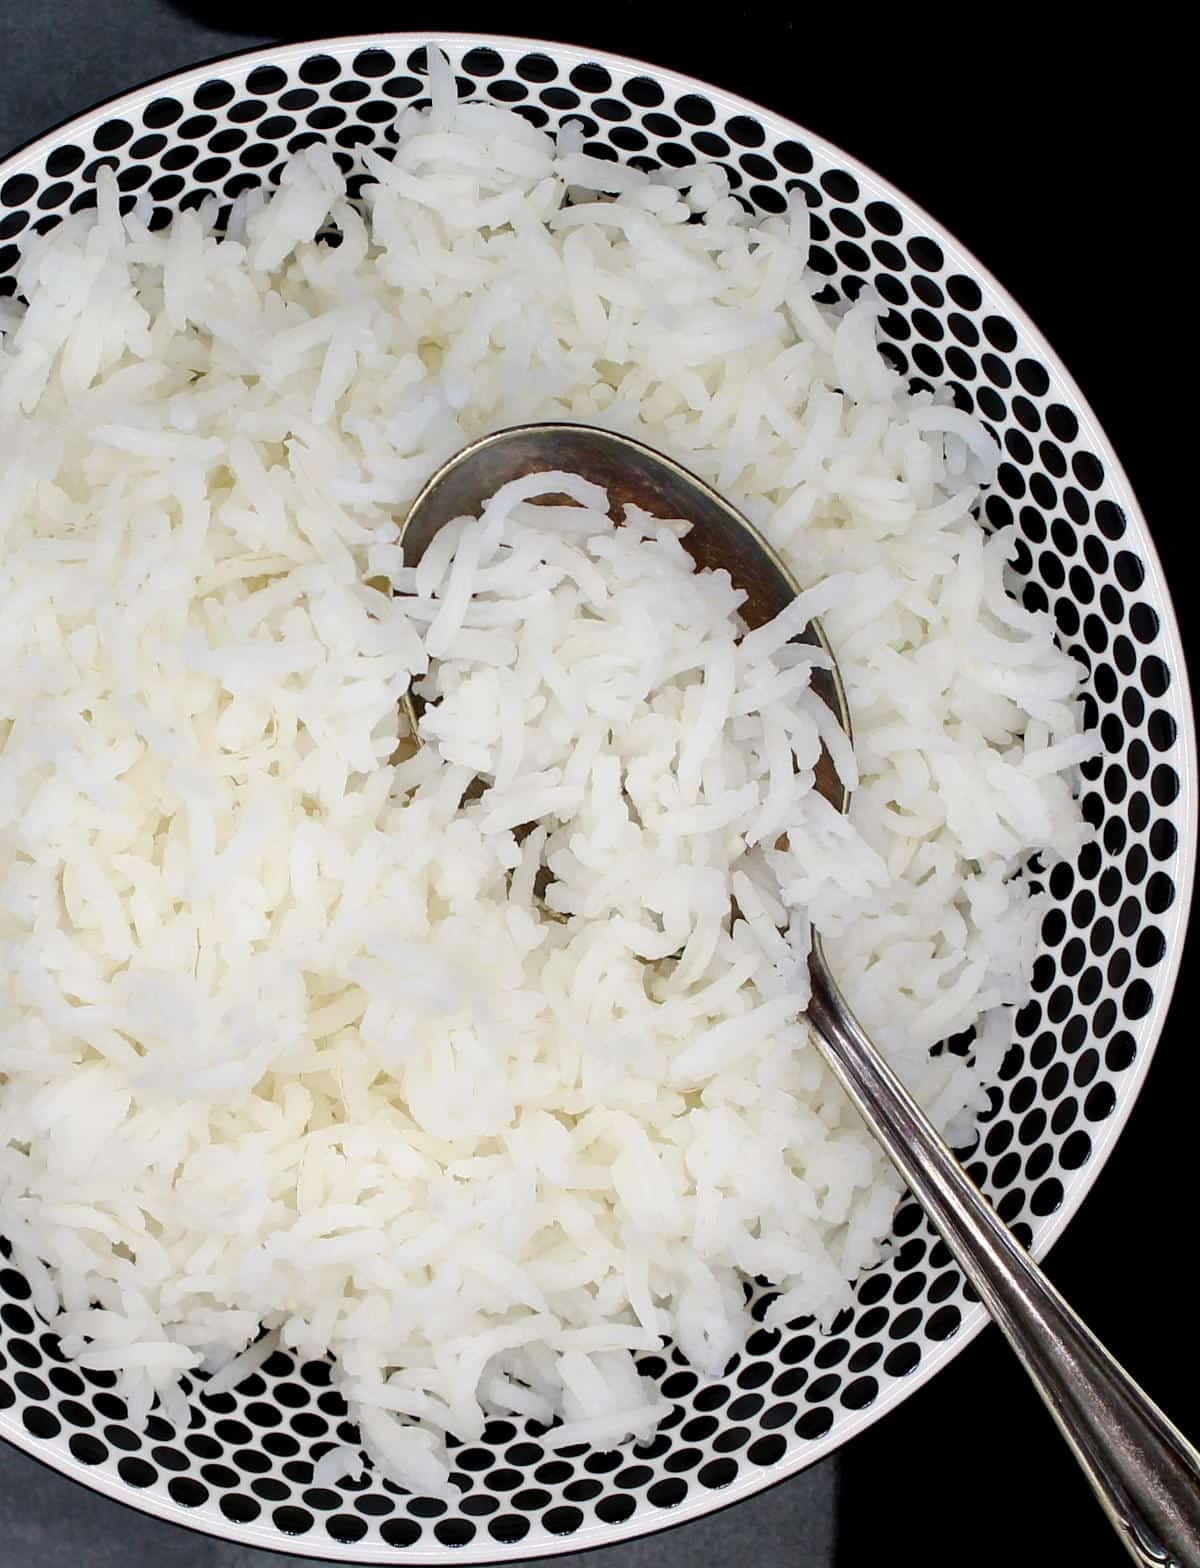 Perfectly cooked basmati rice in bowl with a spoon.